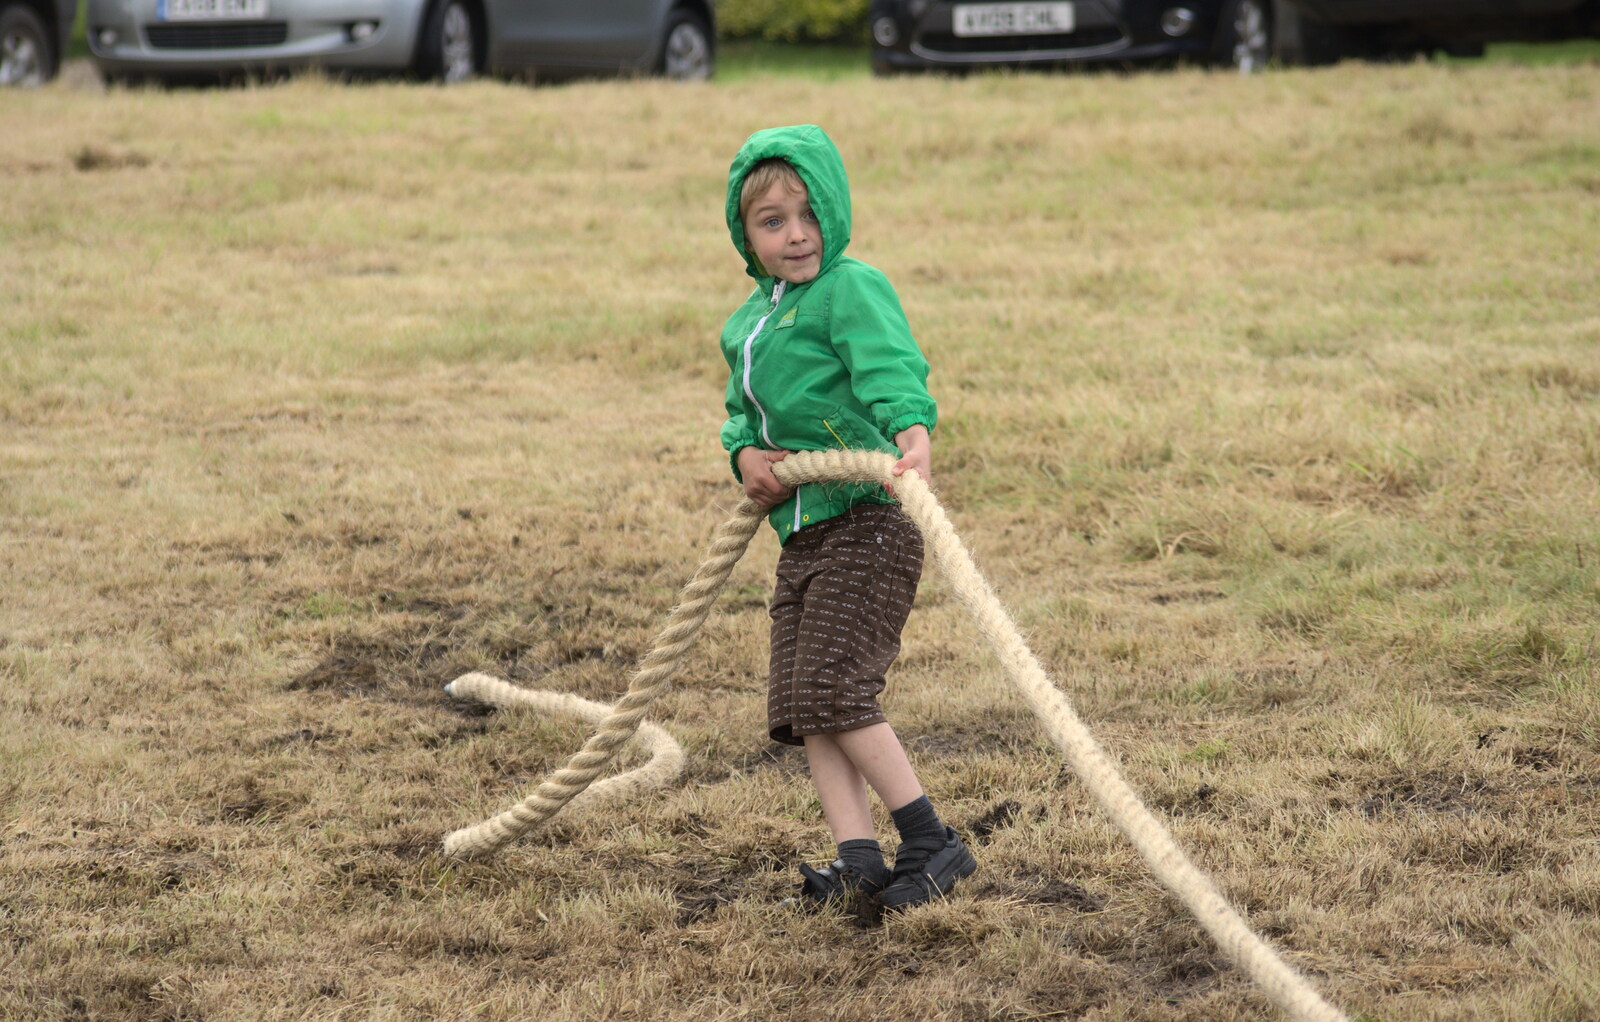 Fred grabs the rope from Thrandeston Pig, Little Green, Thrandeston, Suffolk - 29th June 2014